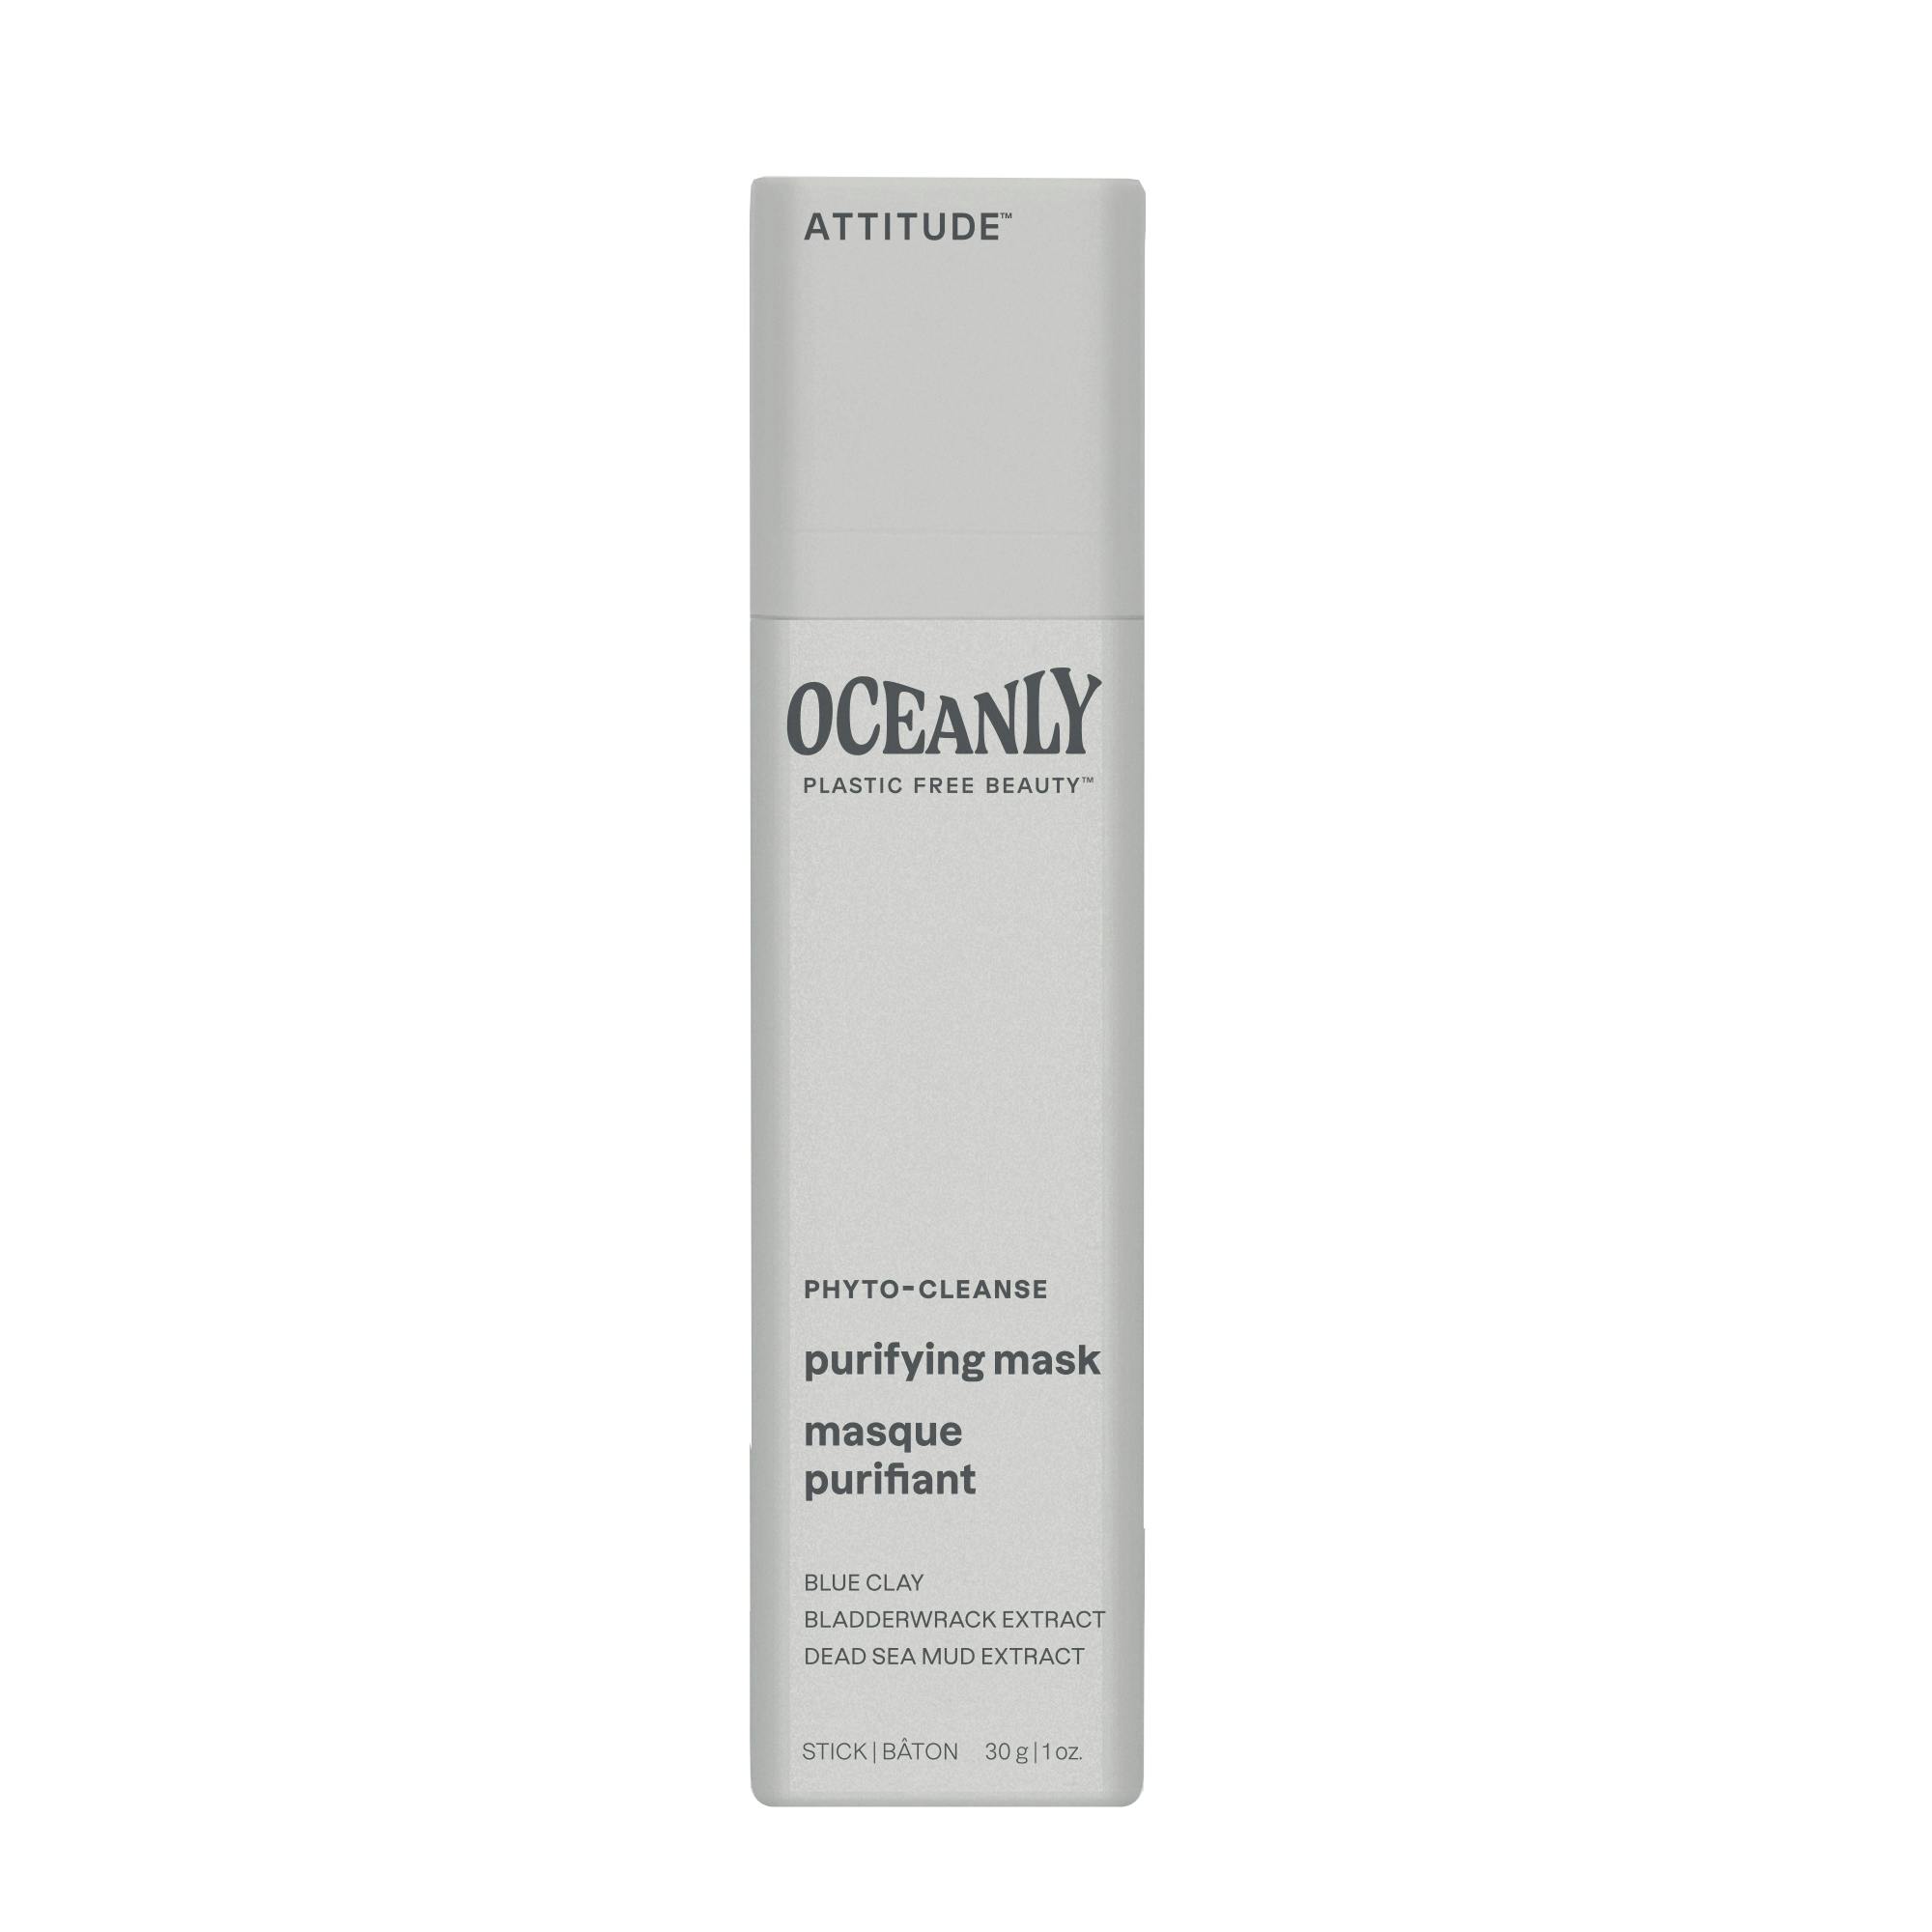 Oceanly PHYTO-CLEANSE Purifying Face Mask 30 g